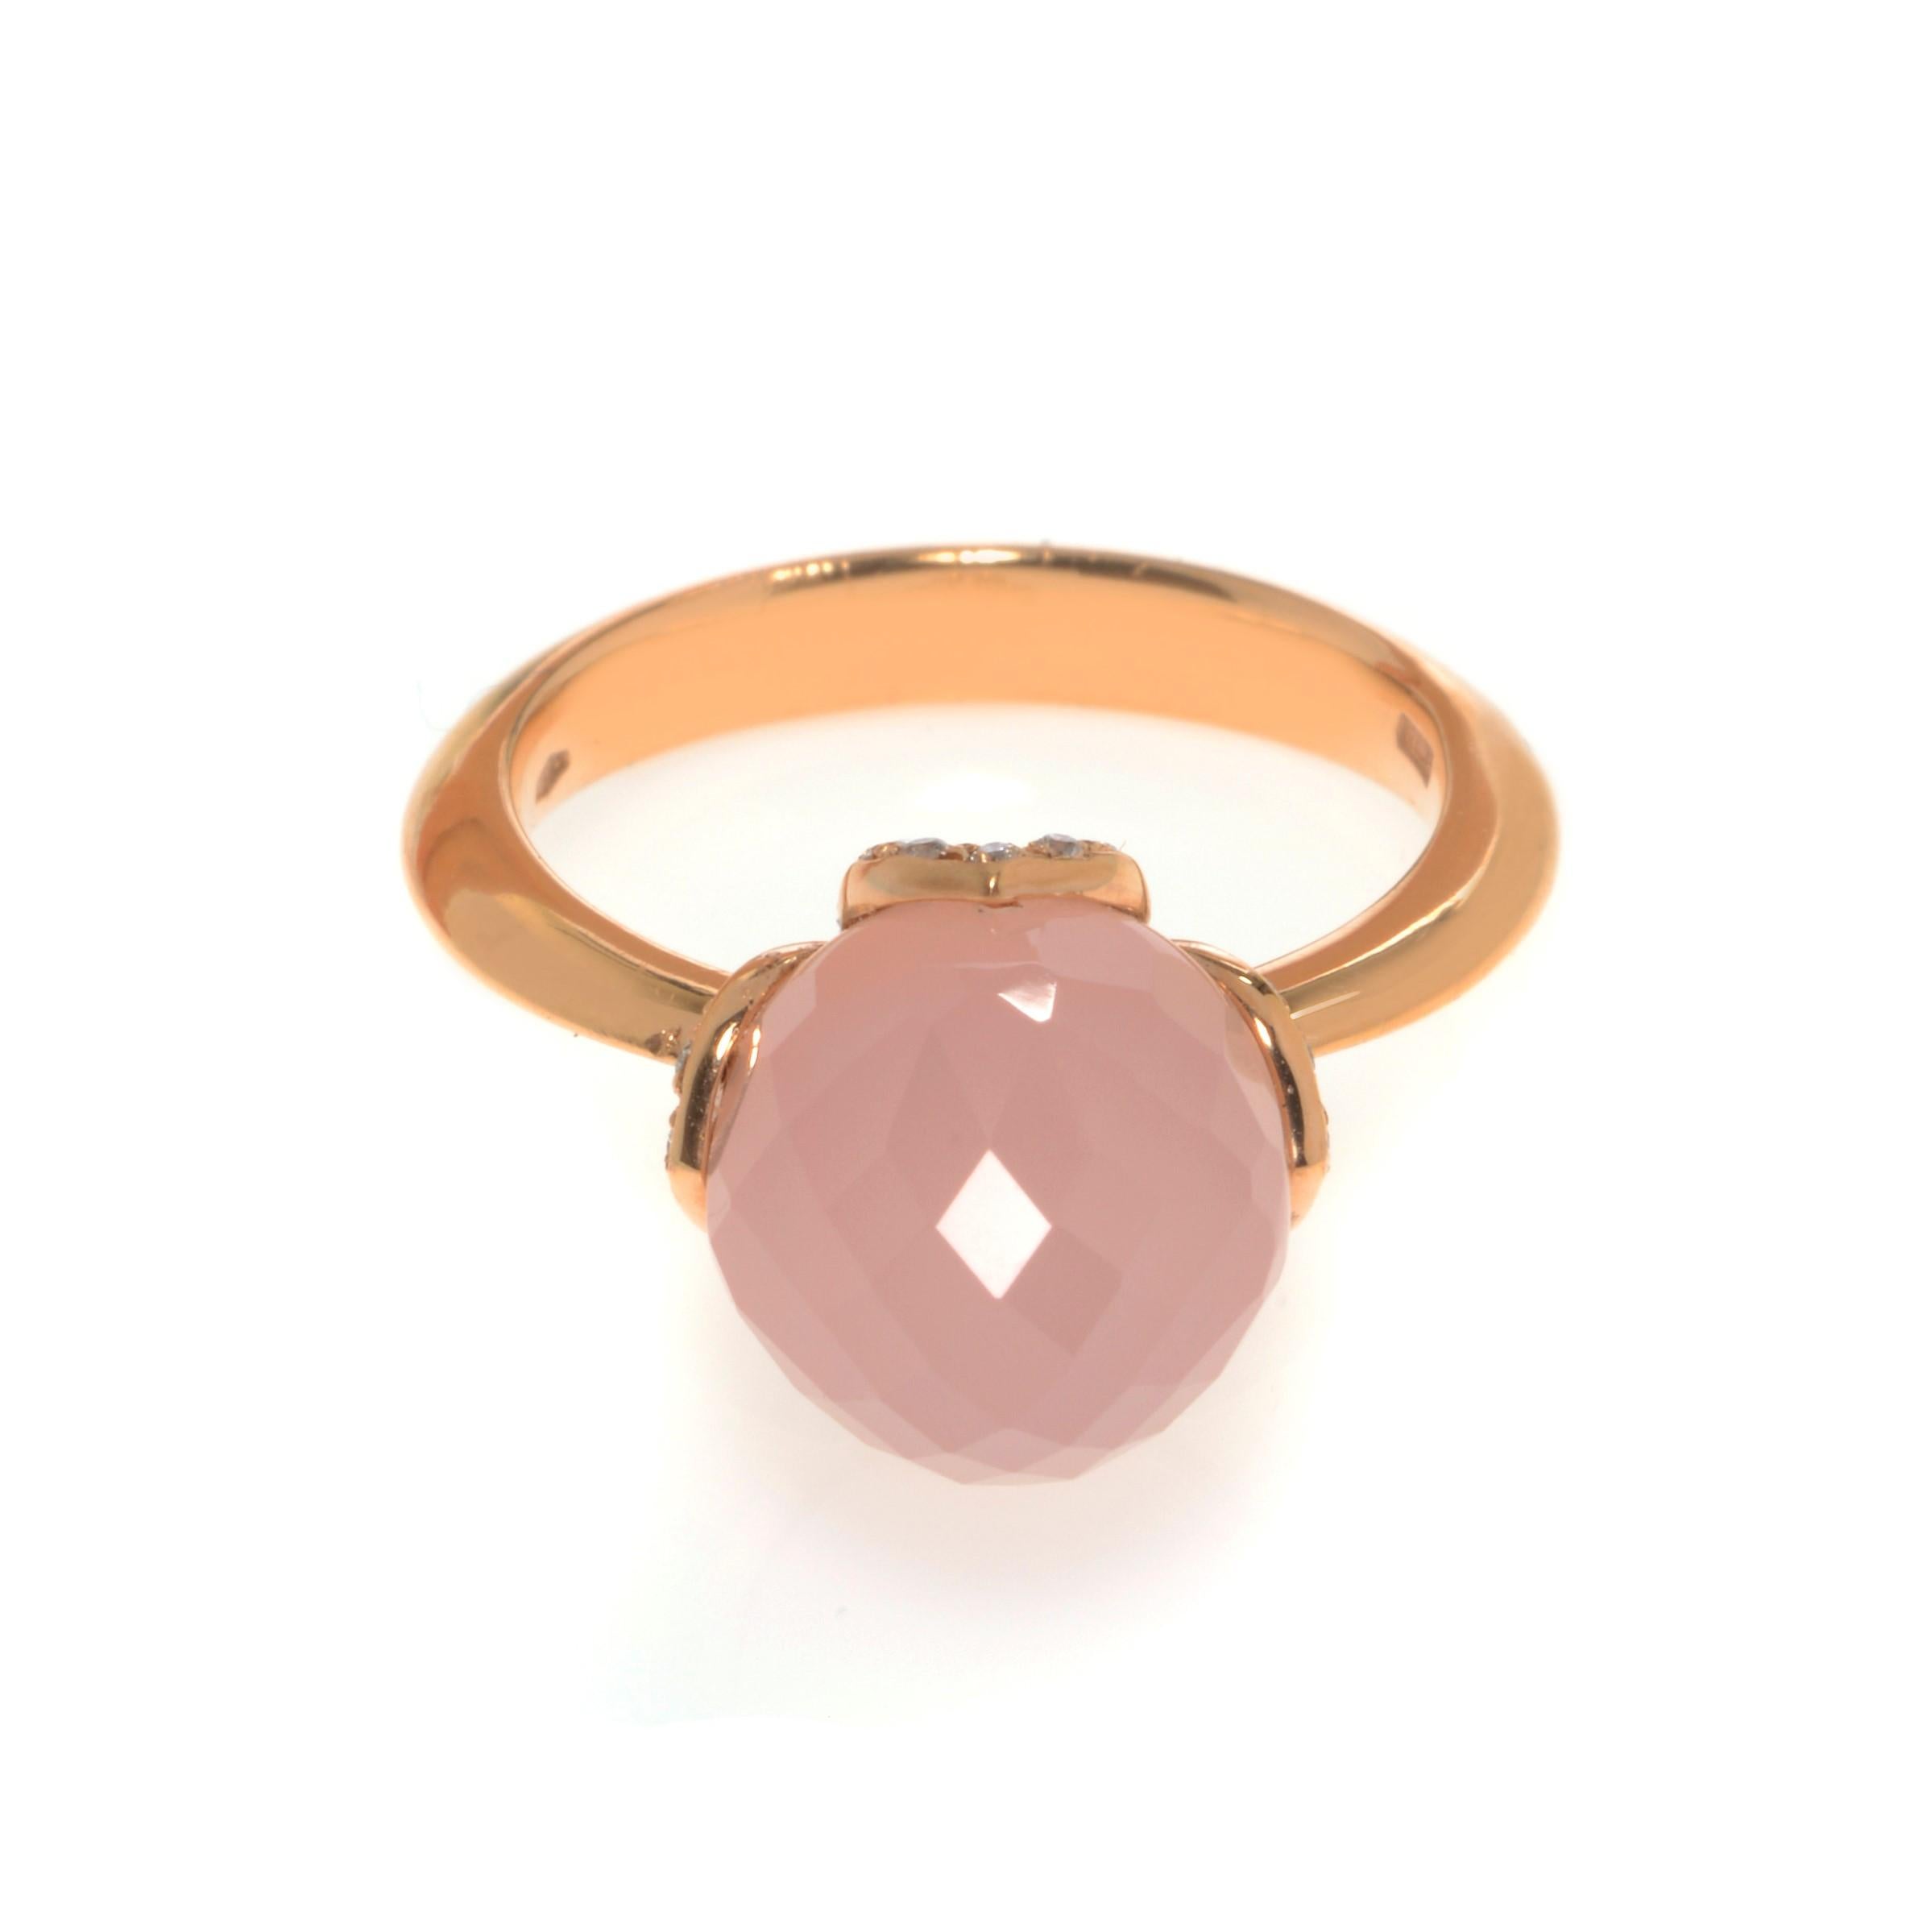 Beautiful and unique this ring features a large single natural pink Chalcedony gemstone set in a romantic rose gold setting. Set with tiny 0.13cttw of white diamonds. Diamond color G and VVS clarity. Chalcedony weight: 1.80 grams. Ring size 7. Comes